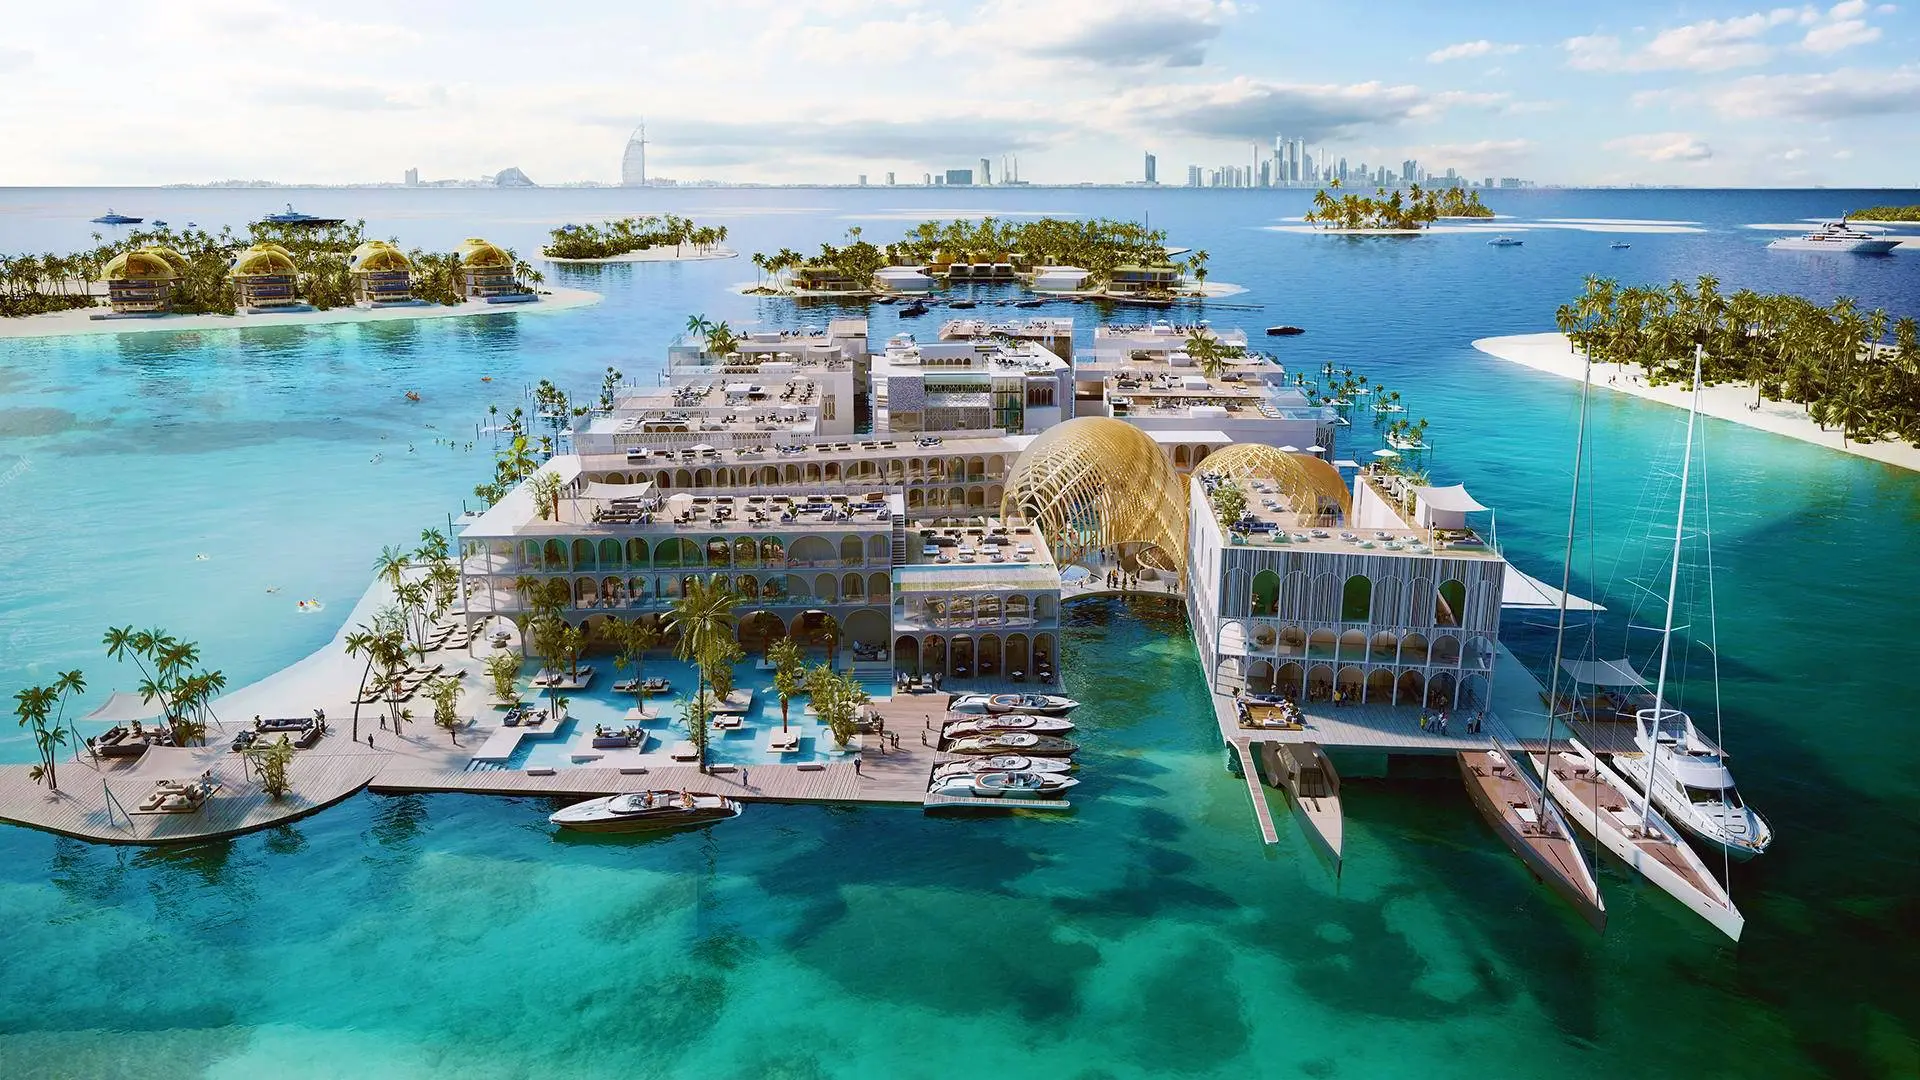 Amazing Upcoming Projects in Dubai